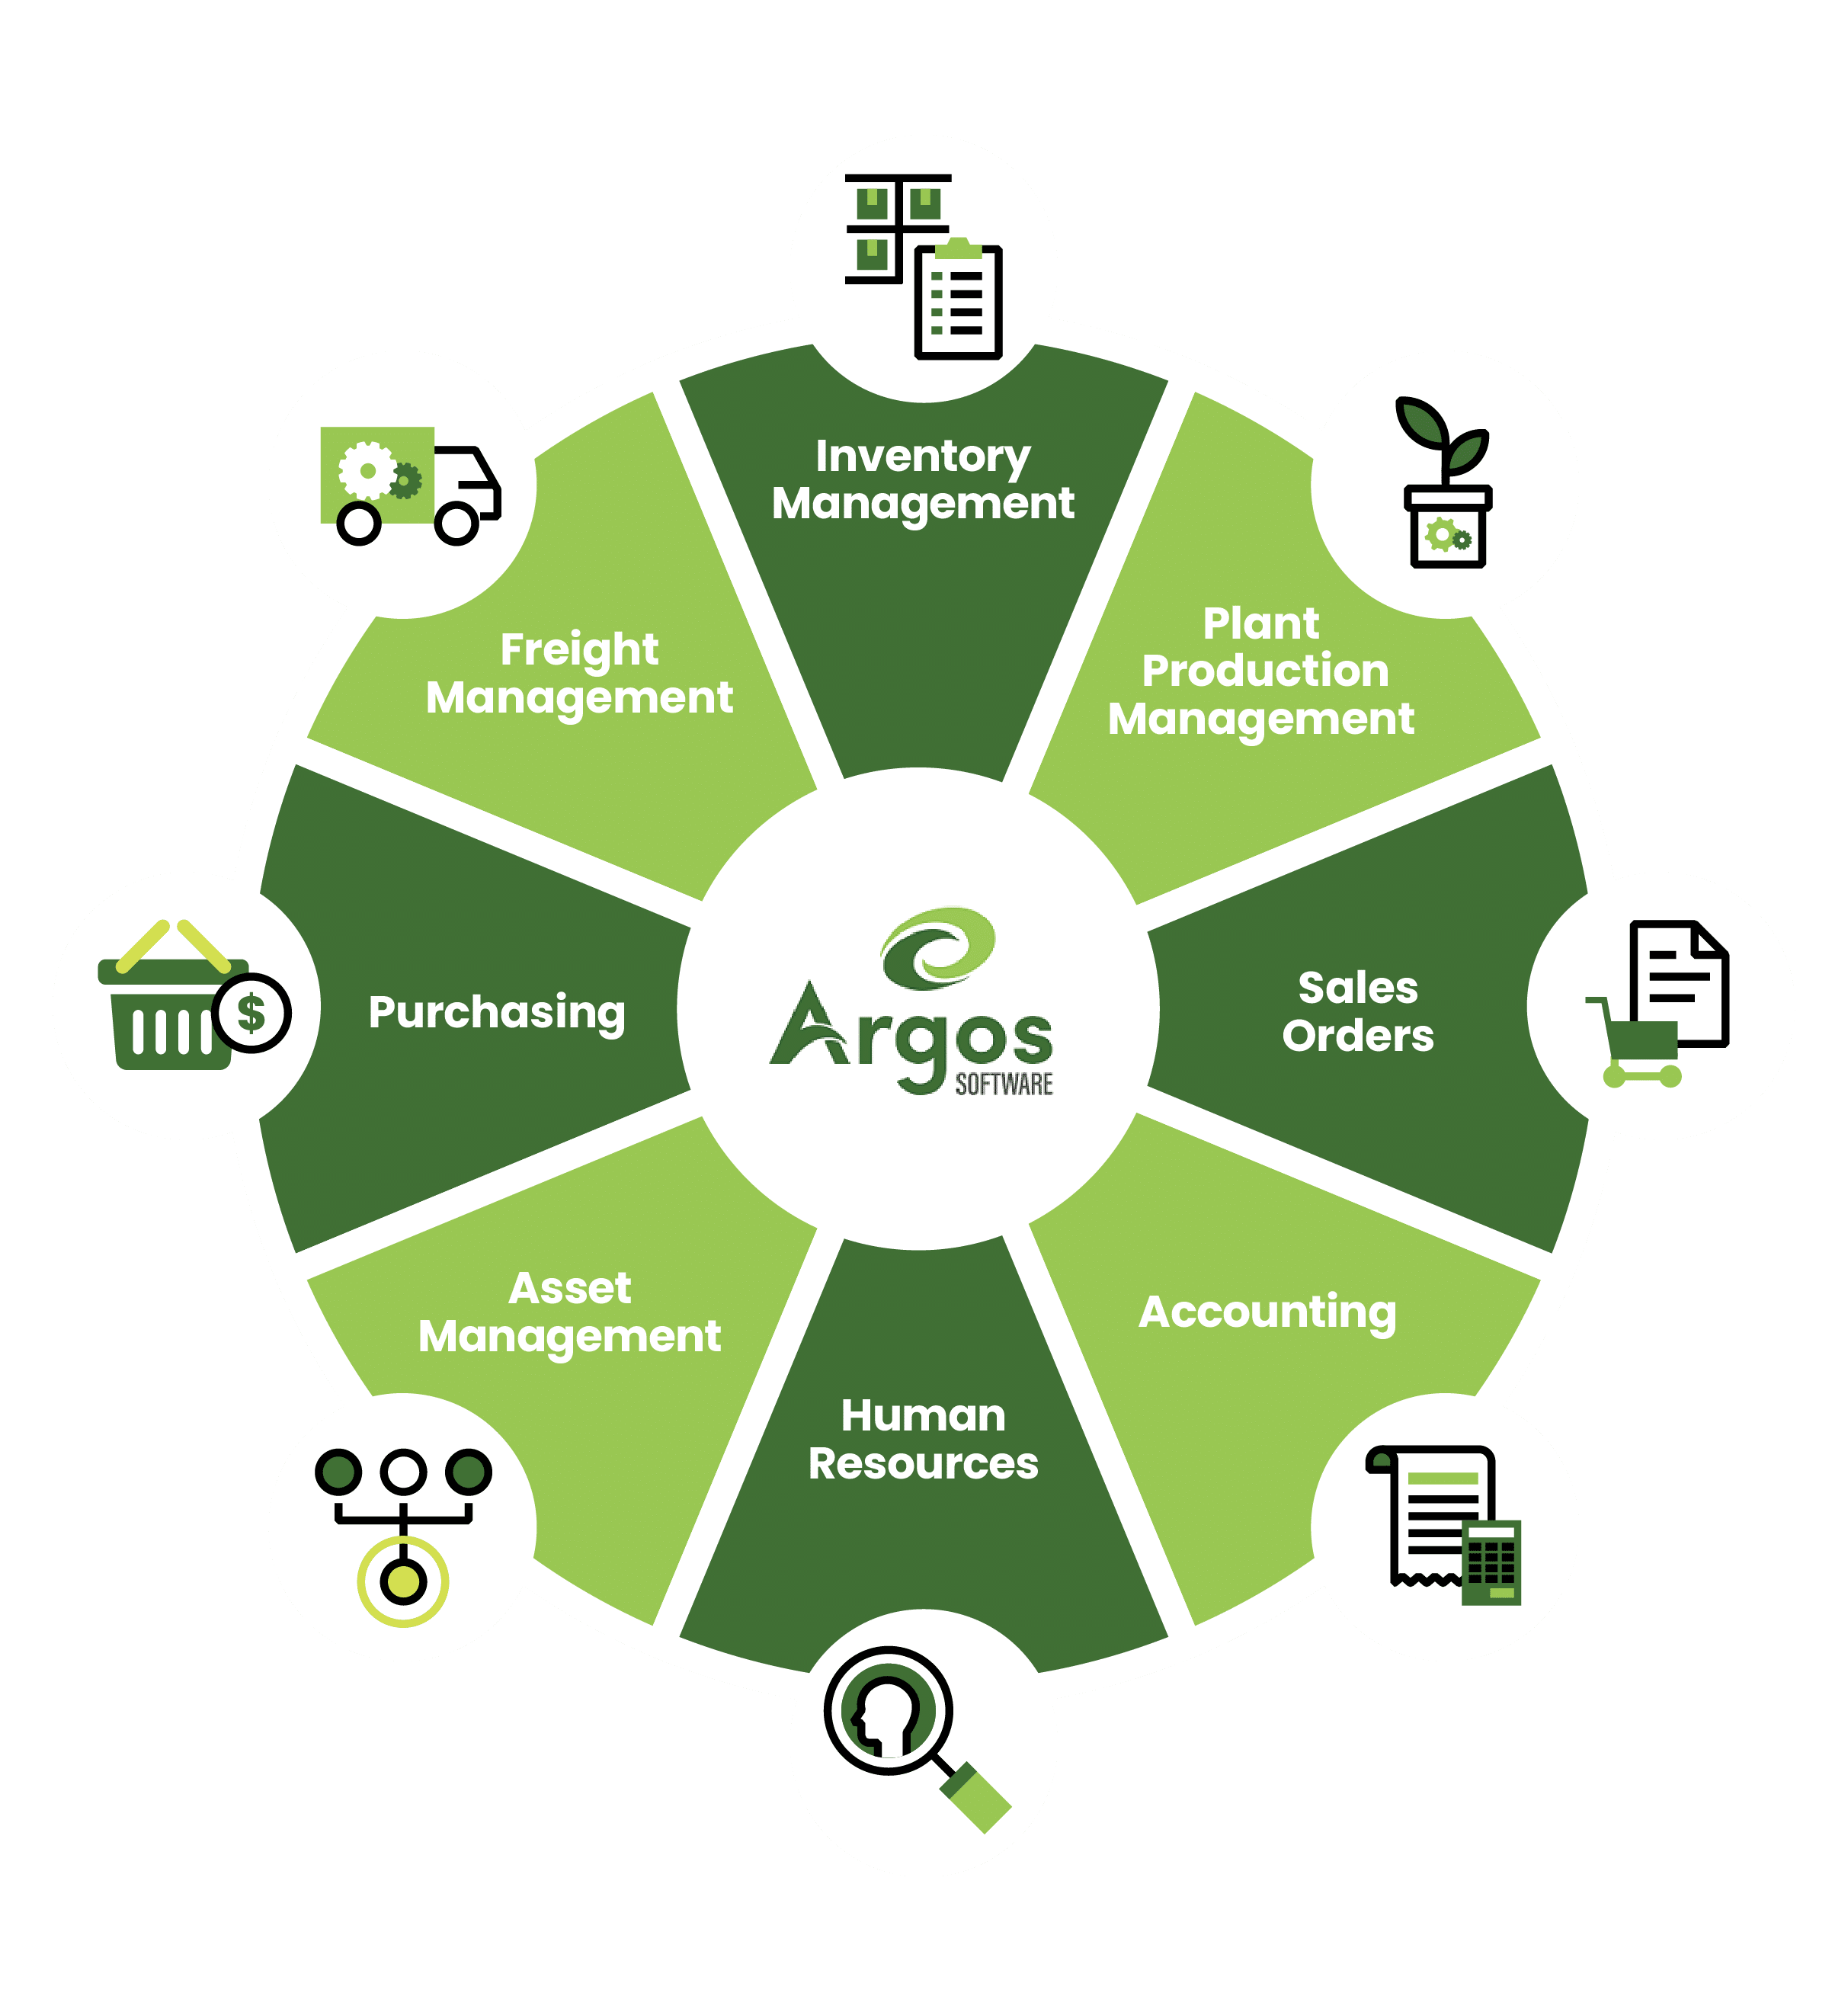 Argos Infographic on features